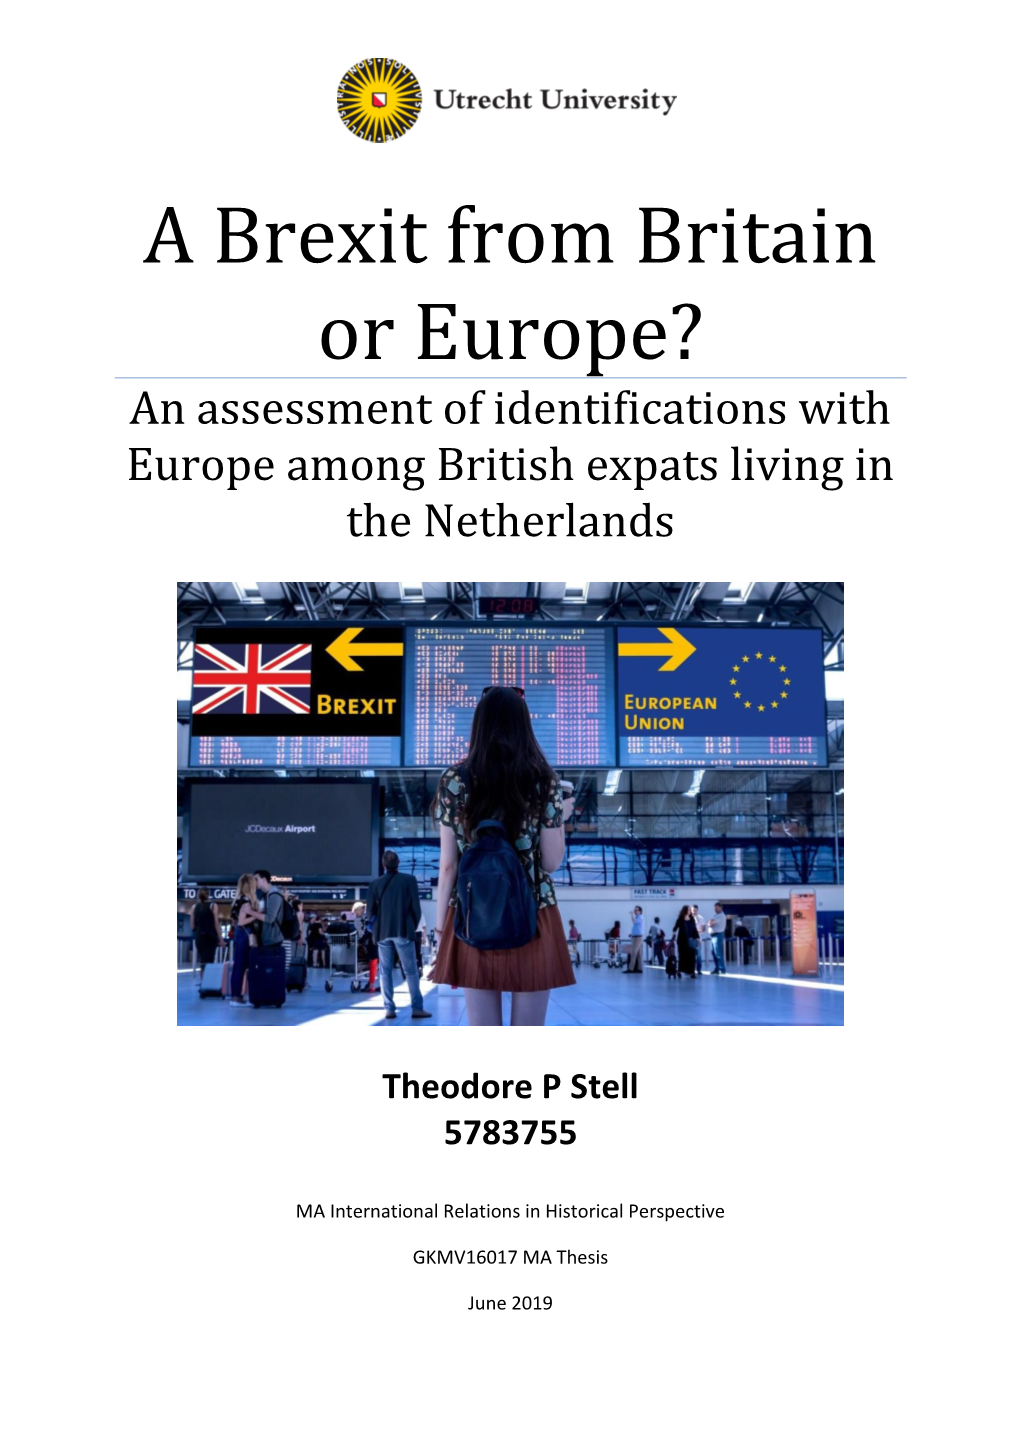 A Brexit from Britain Or Europe? an Assessment of Identifications with Europe Among British Expats Living in the Netherlands